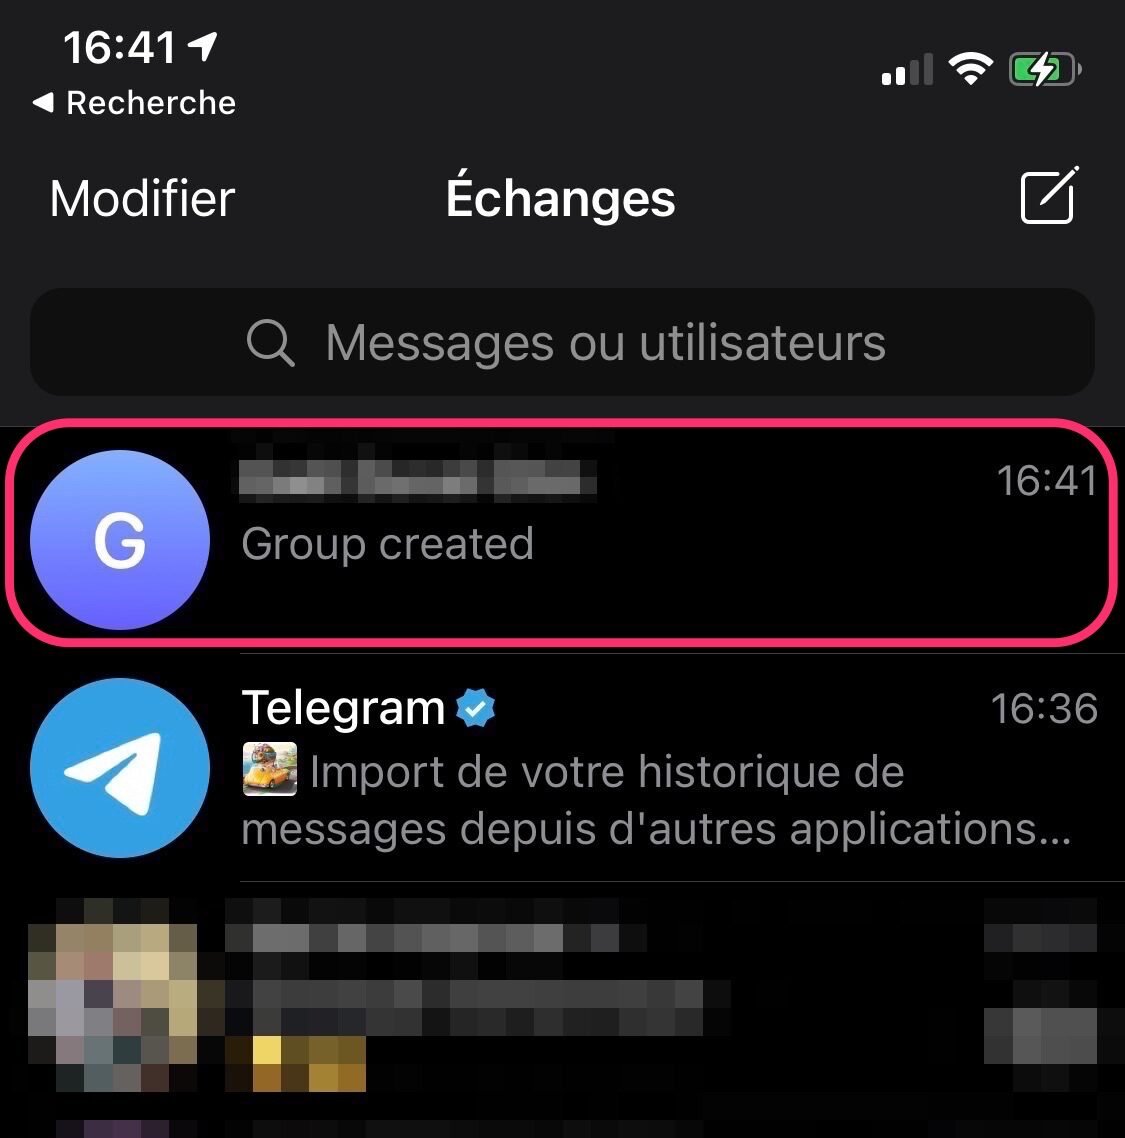 How to migrate from WhatsApp to Telegram